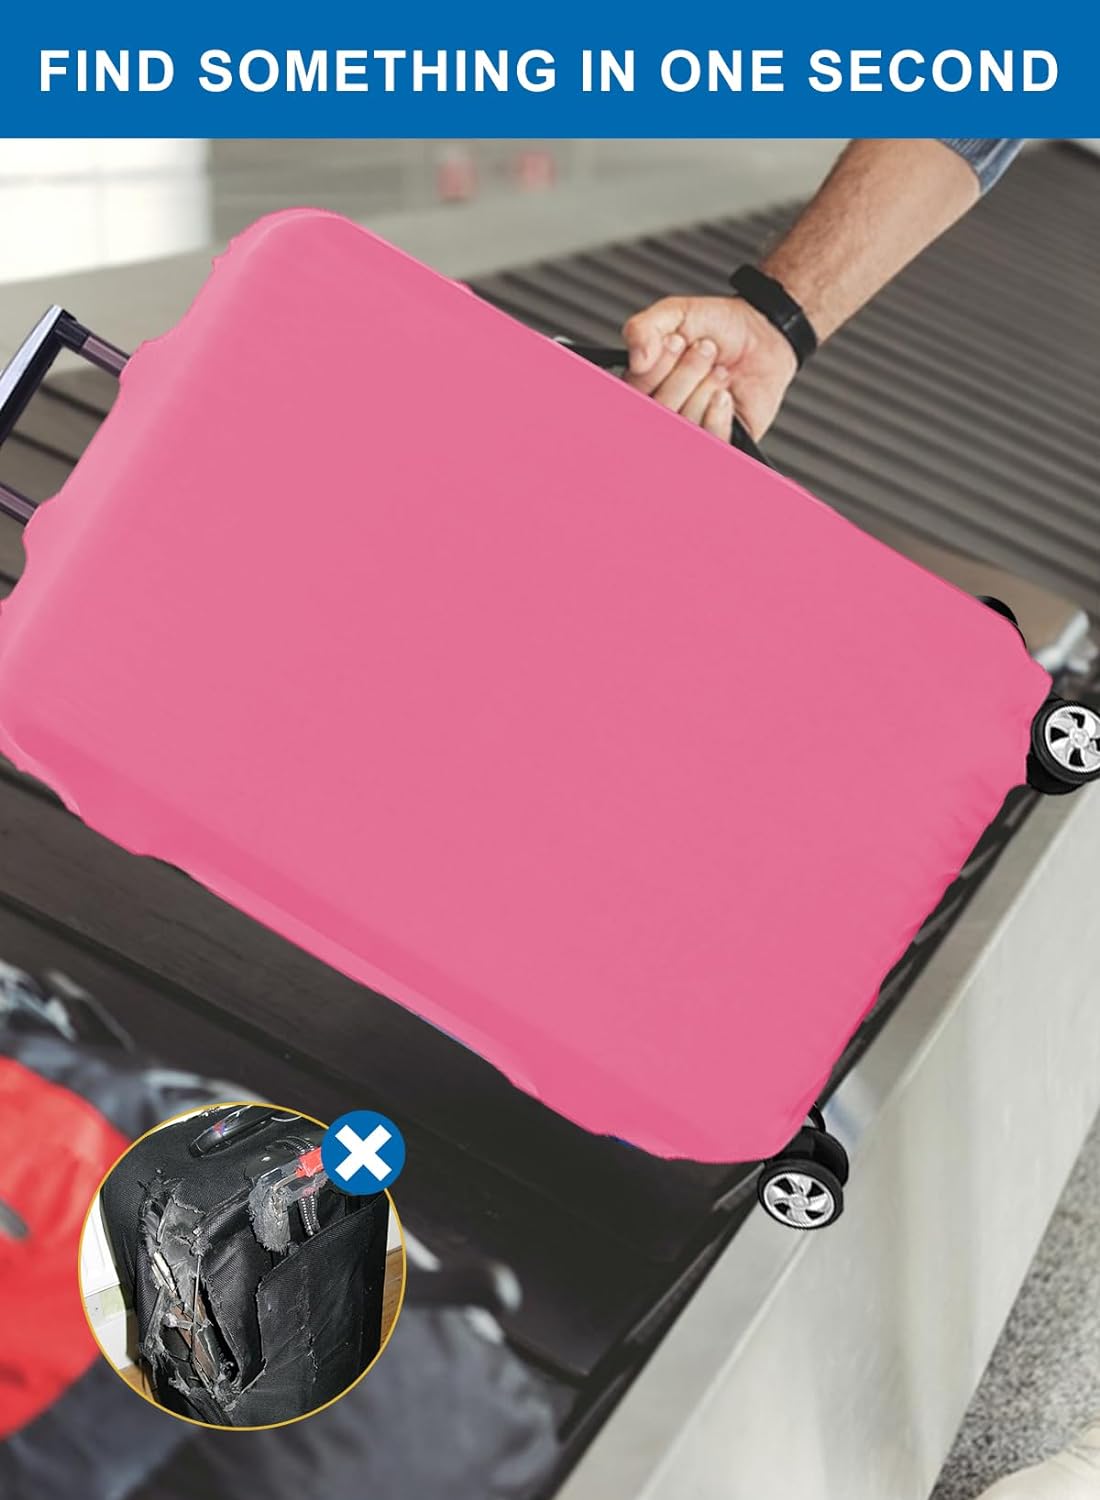 Homarket Travel Luggage Cover Suitcase Protector Fits 18-32 Inch Luggage and Washable Baggage Covers (L(26-28 inch luggage), Black)